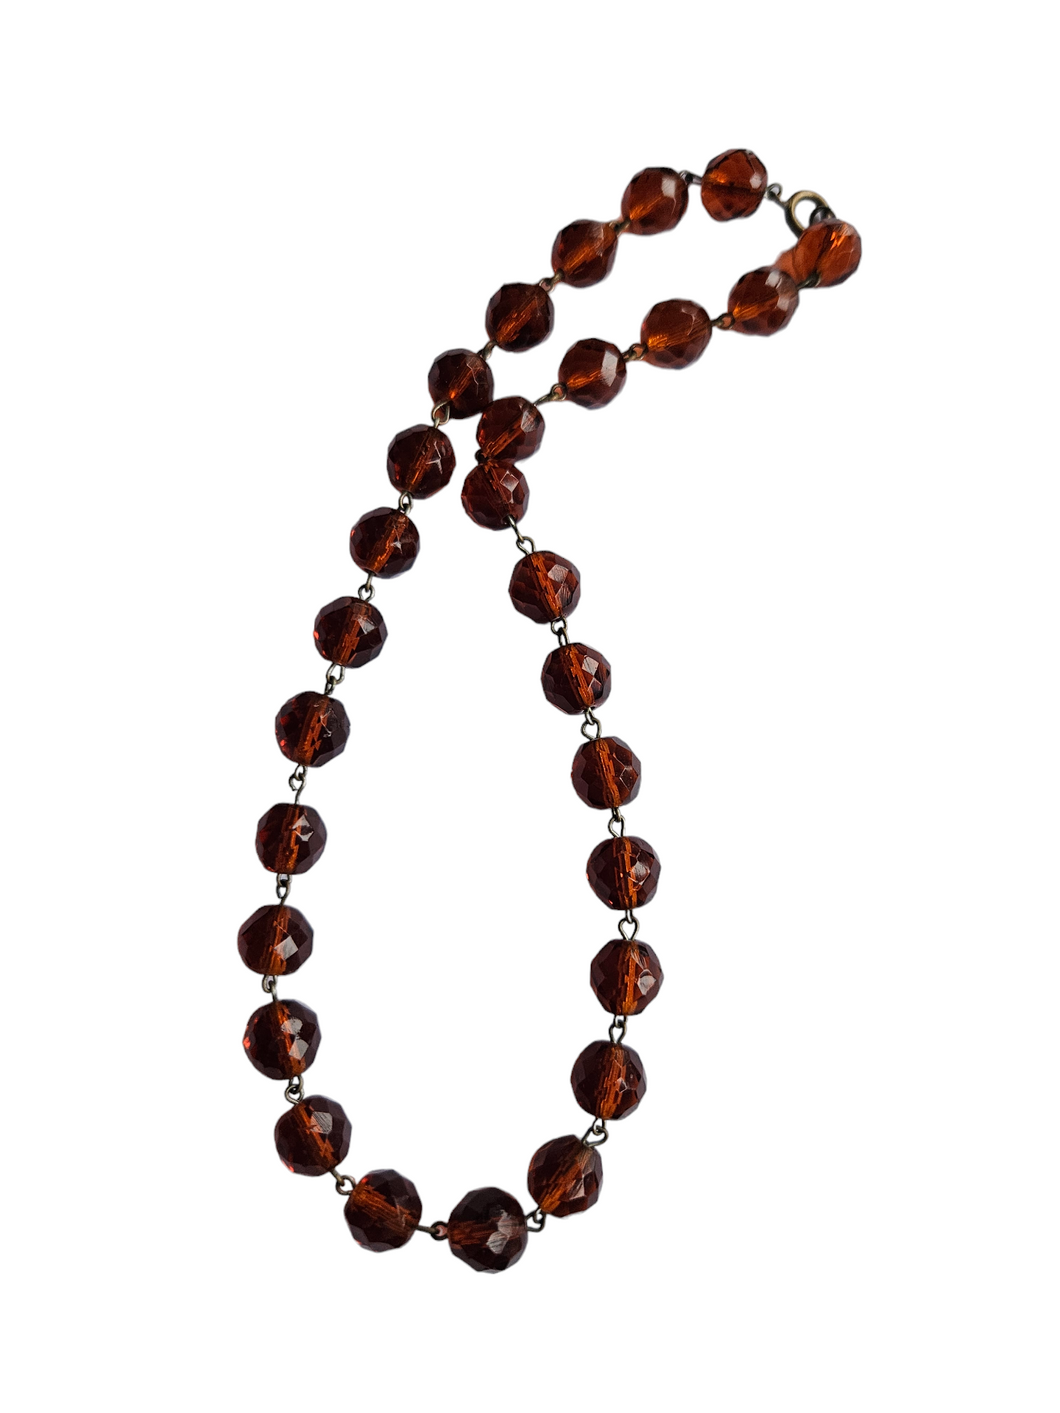 1930s Deco Brown Faceted Glass Necklace